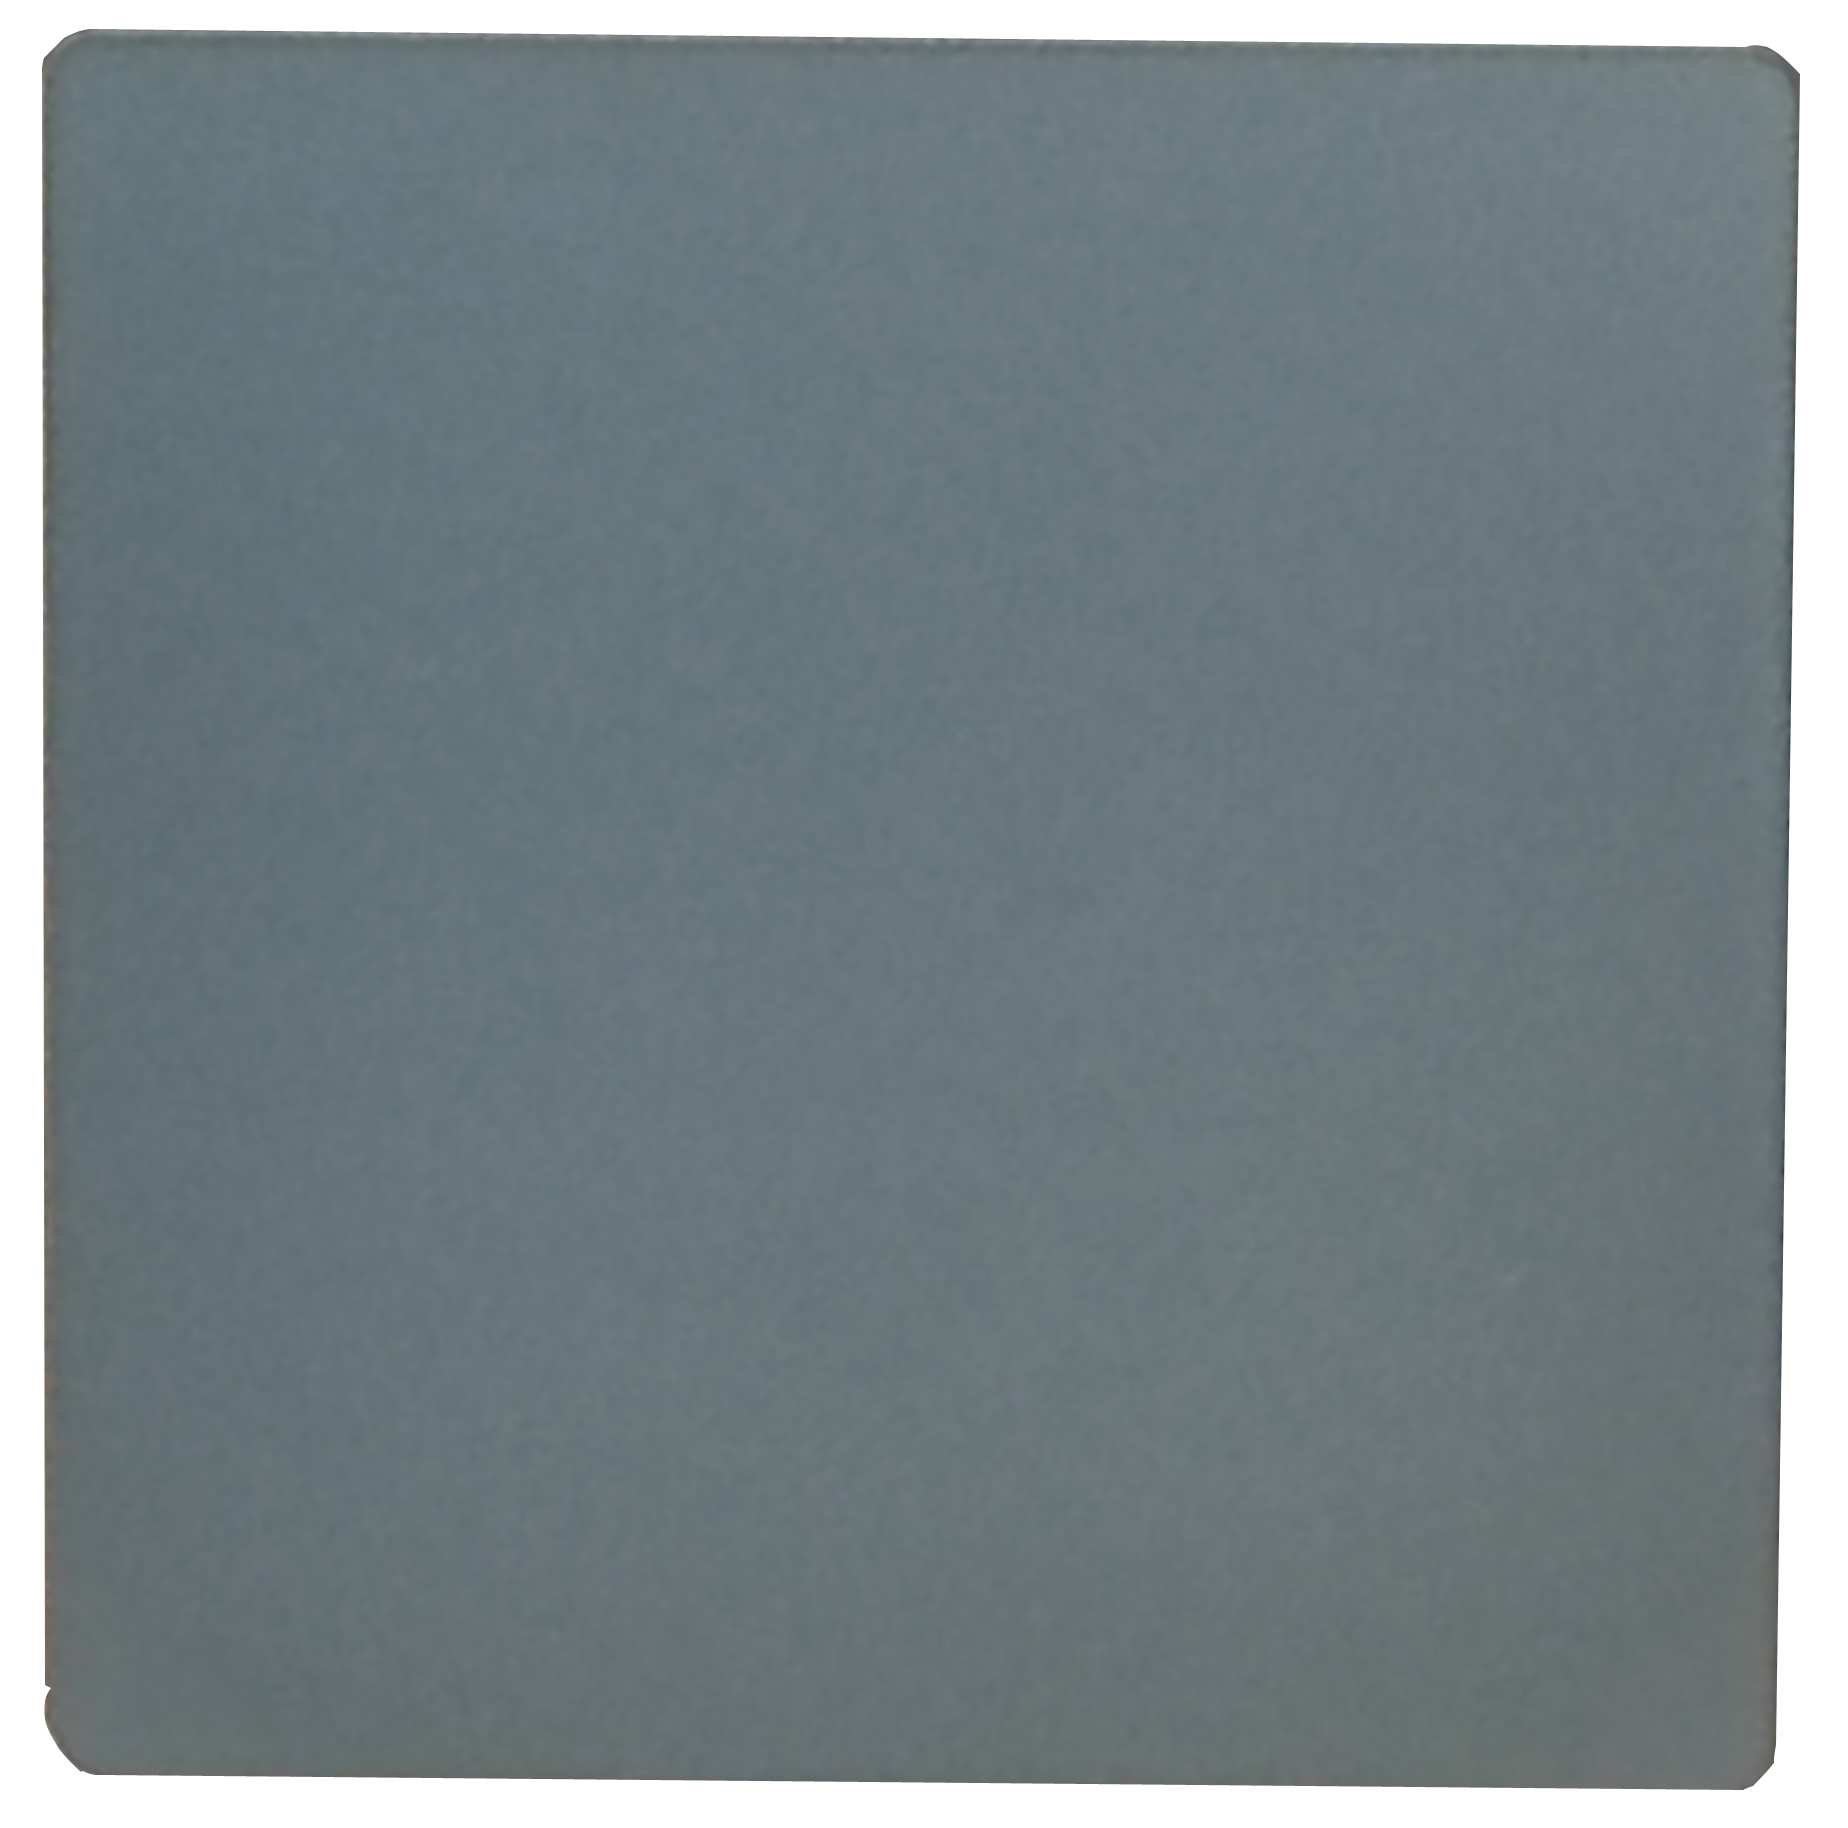 Grey color ultra thin glass panel 1gang 10A Big Button glass panel Wall Switch